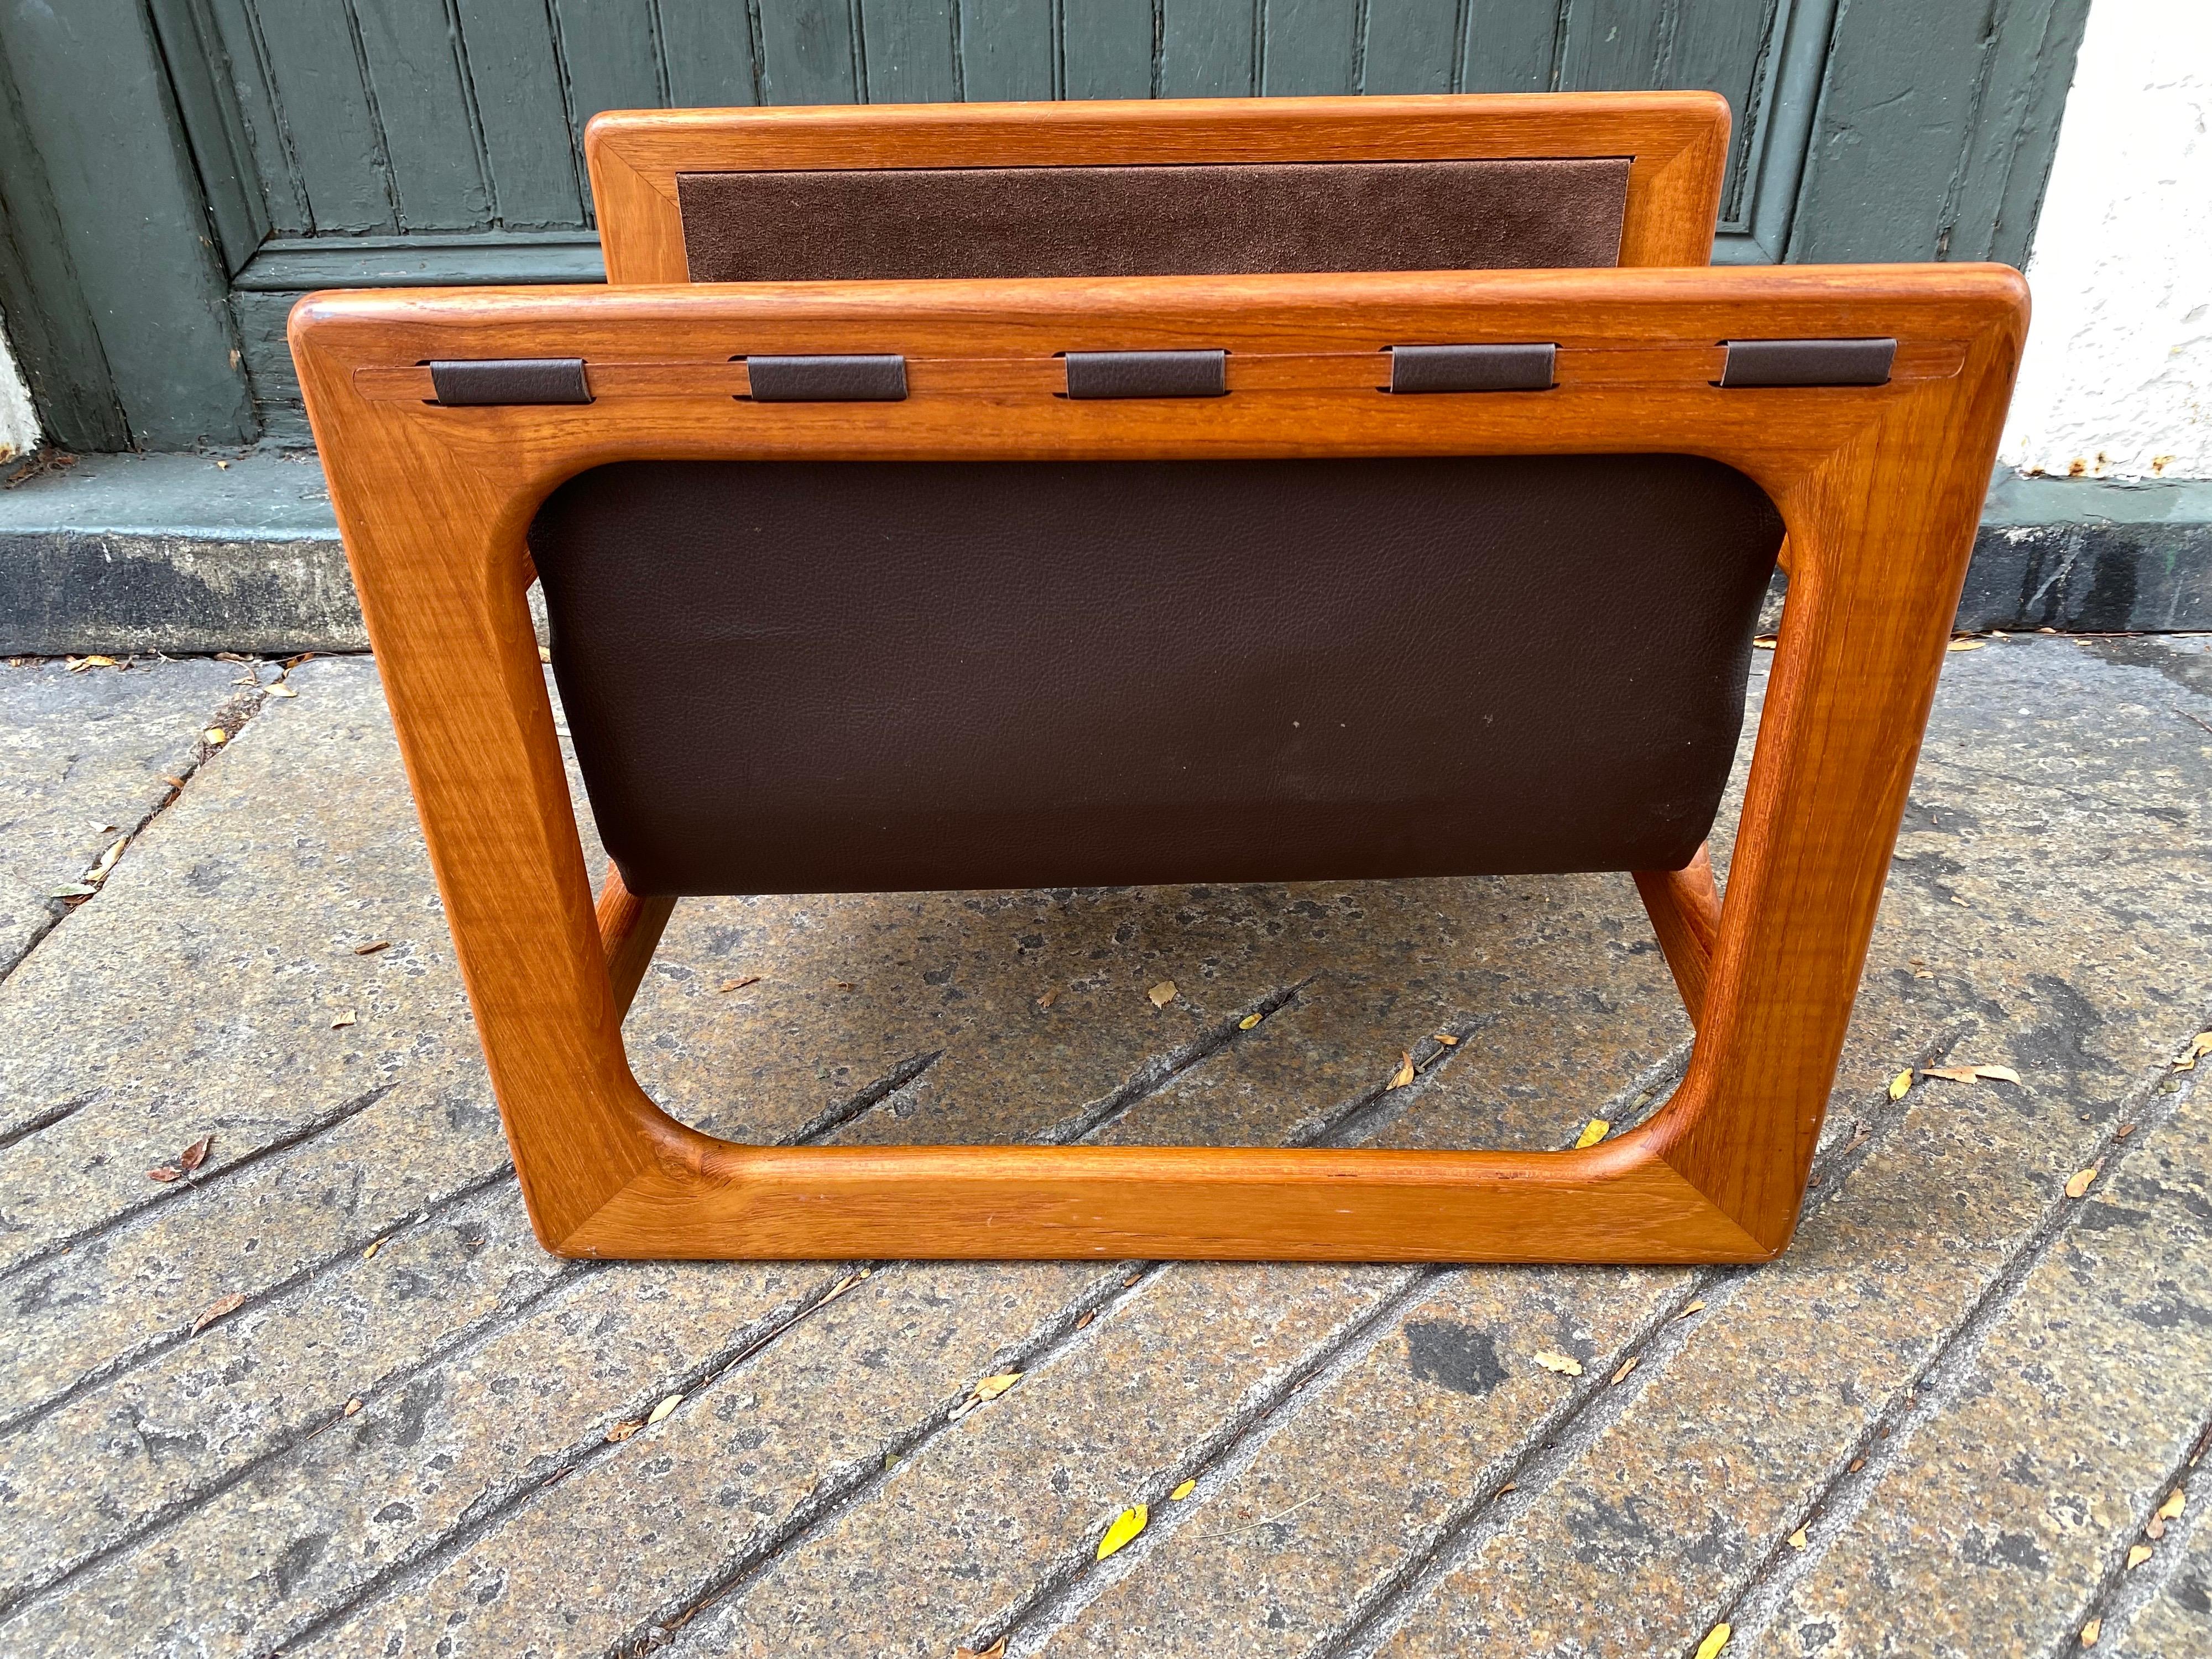 Danish teak magazine rack with a hanging brown leather sling. Nice size and scale! Very sturdy! Solid teak construction. Rack dates from the 1970's.